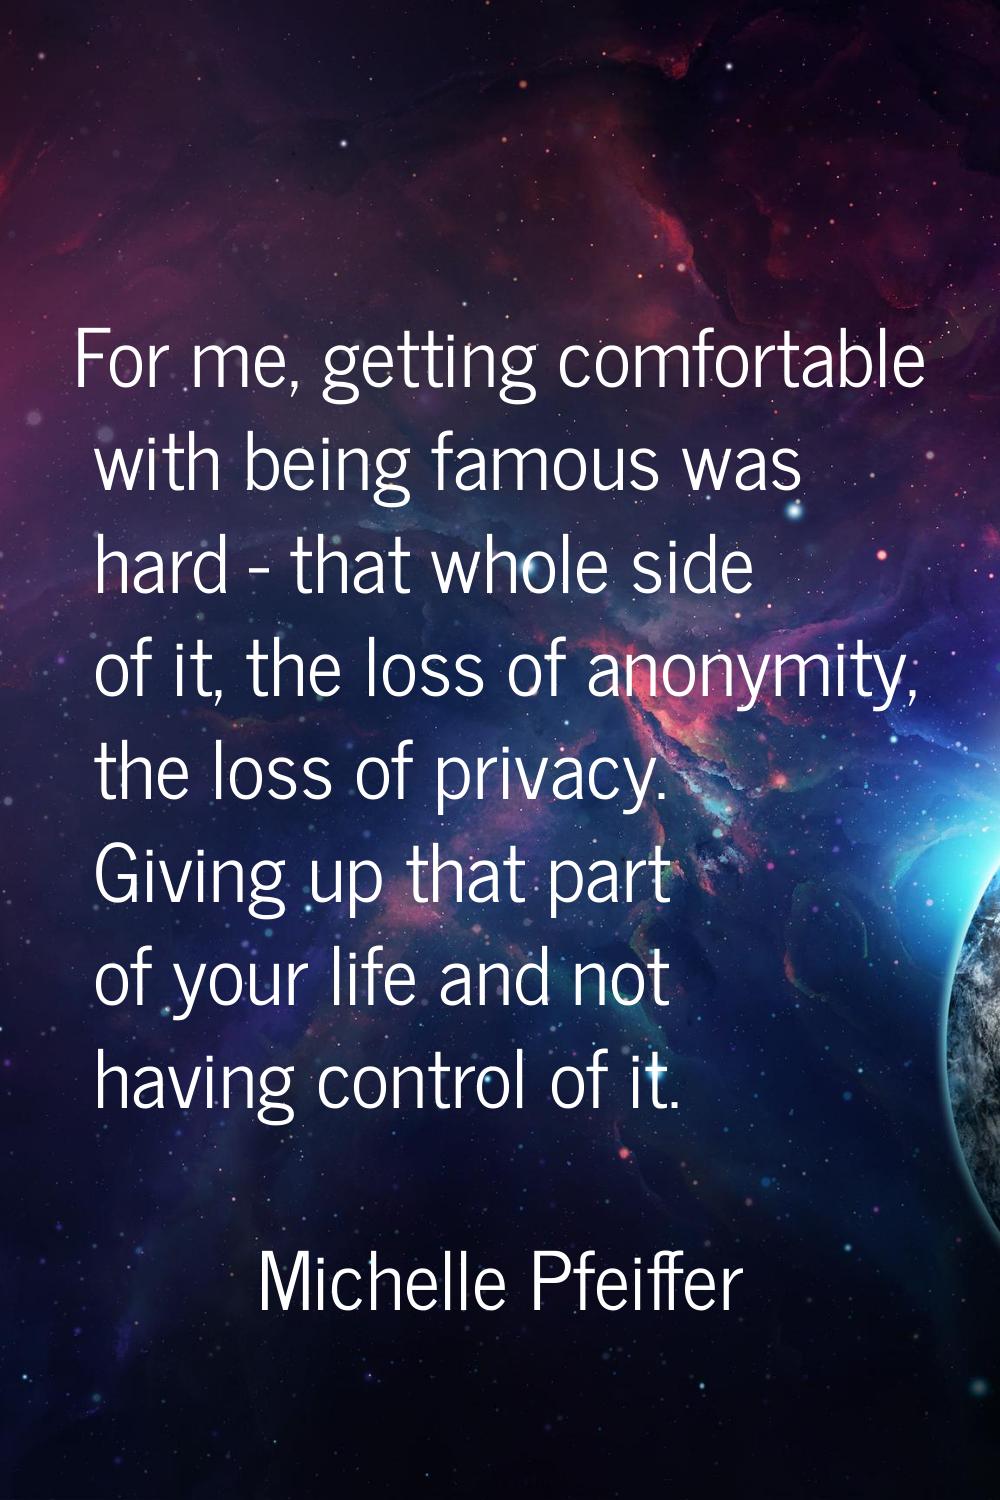 For me, getting comfortable with being famous was hard - that whole side of it, the loss of anonymi